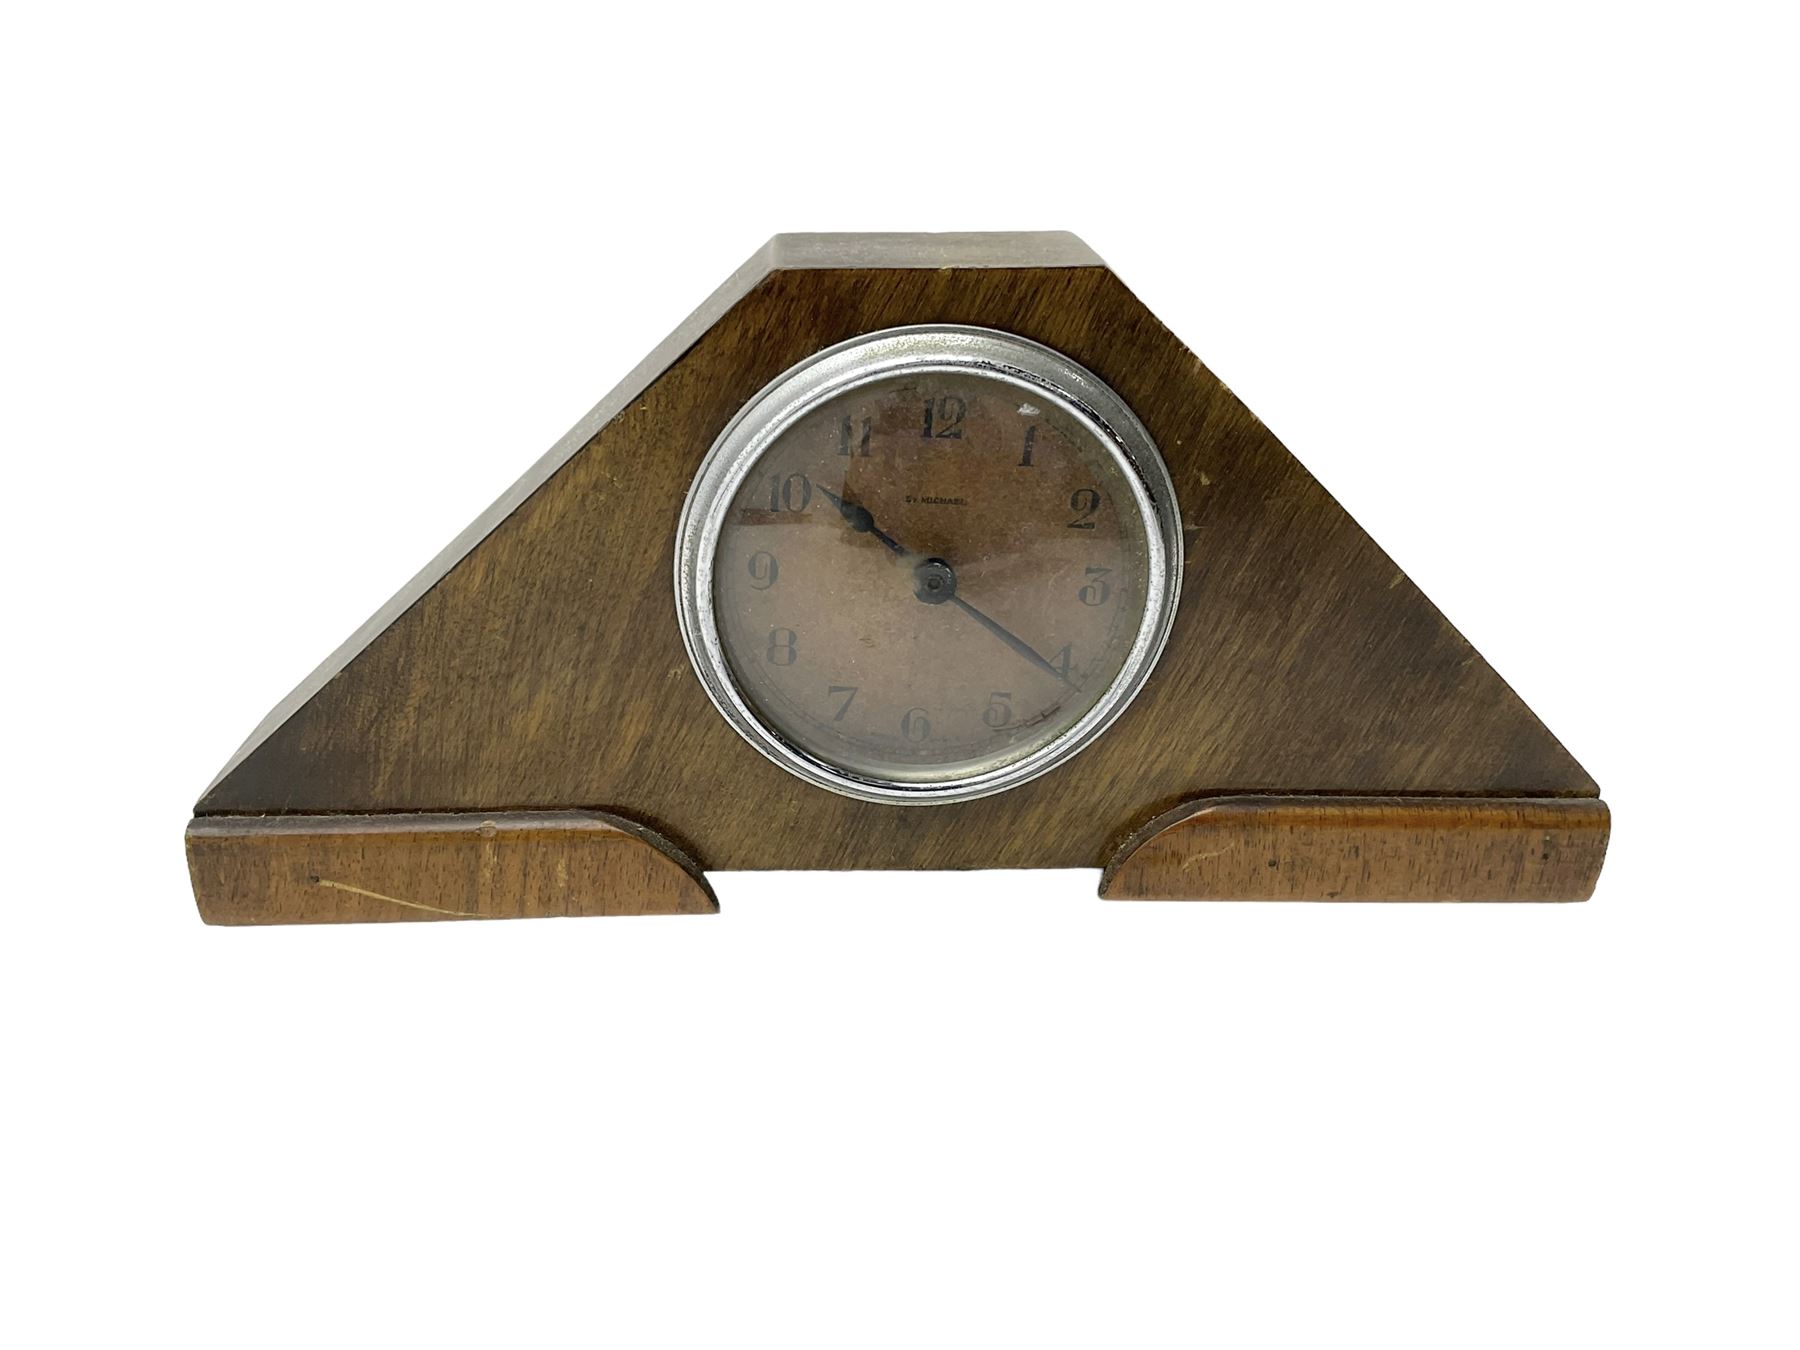 1930s - English mantle clock in oak case - Image 3 of 4